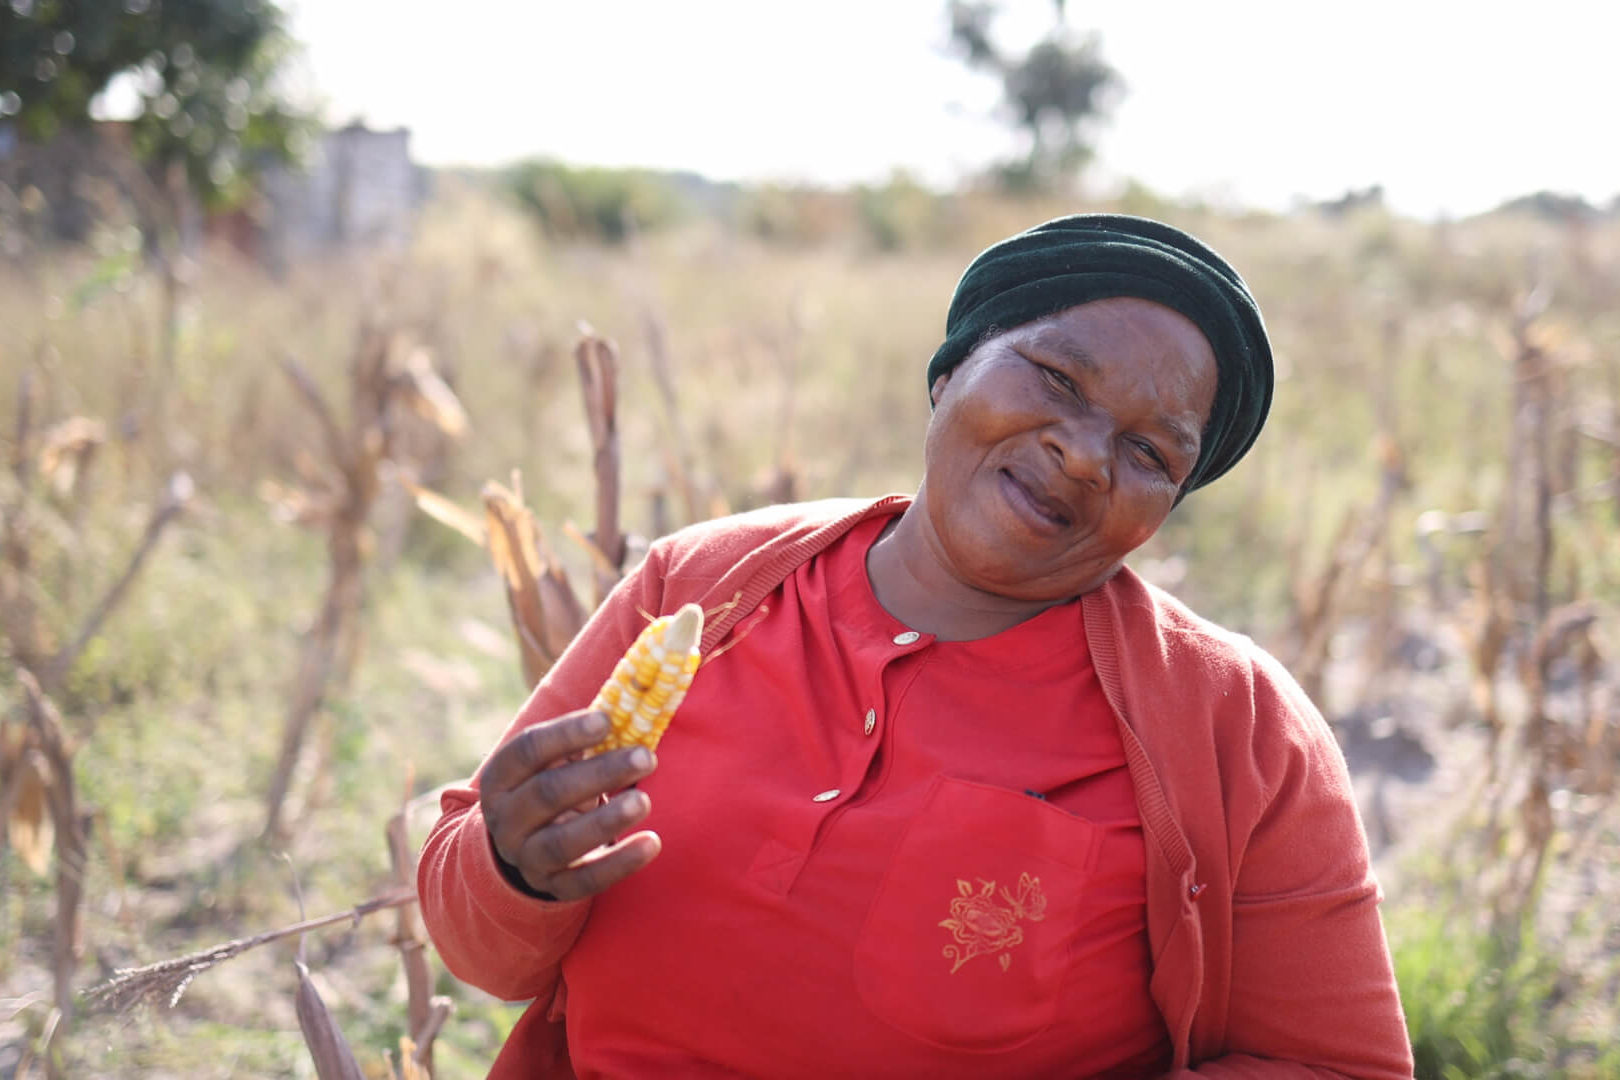 Vulindlela Vegetable Garden supported by the Isibindi Foundation (travelling with purpose)